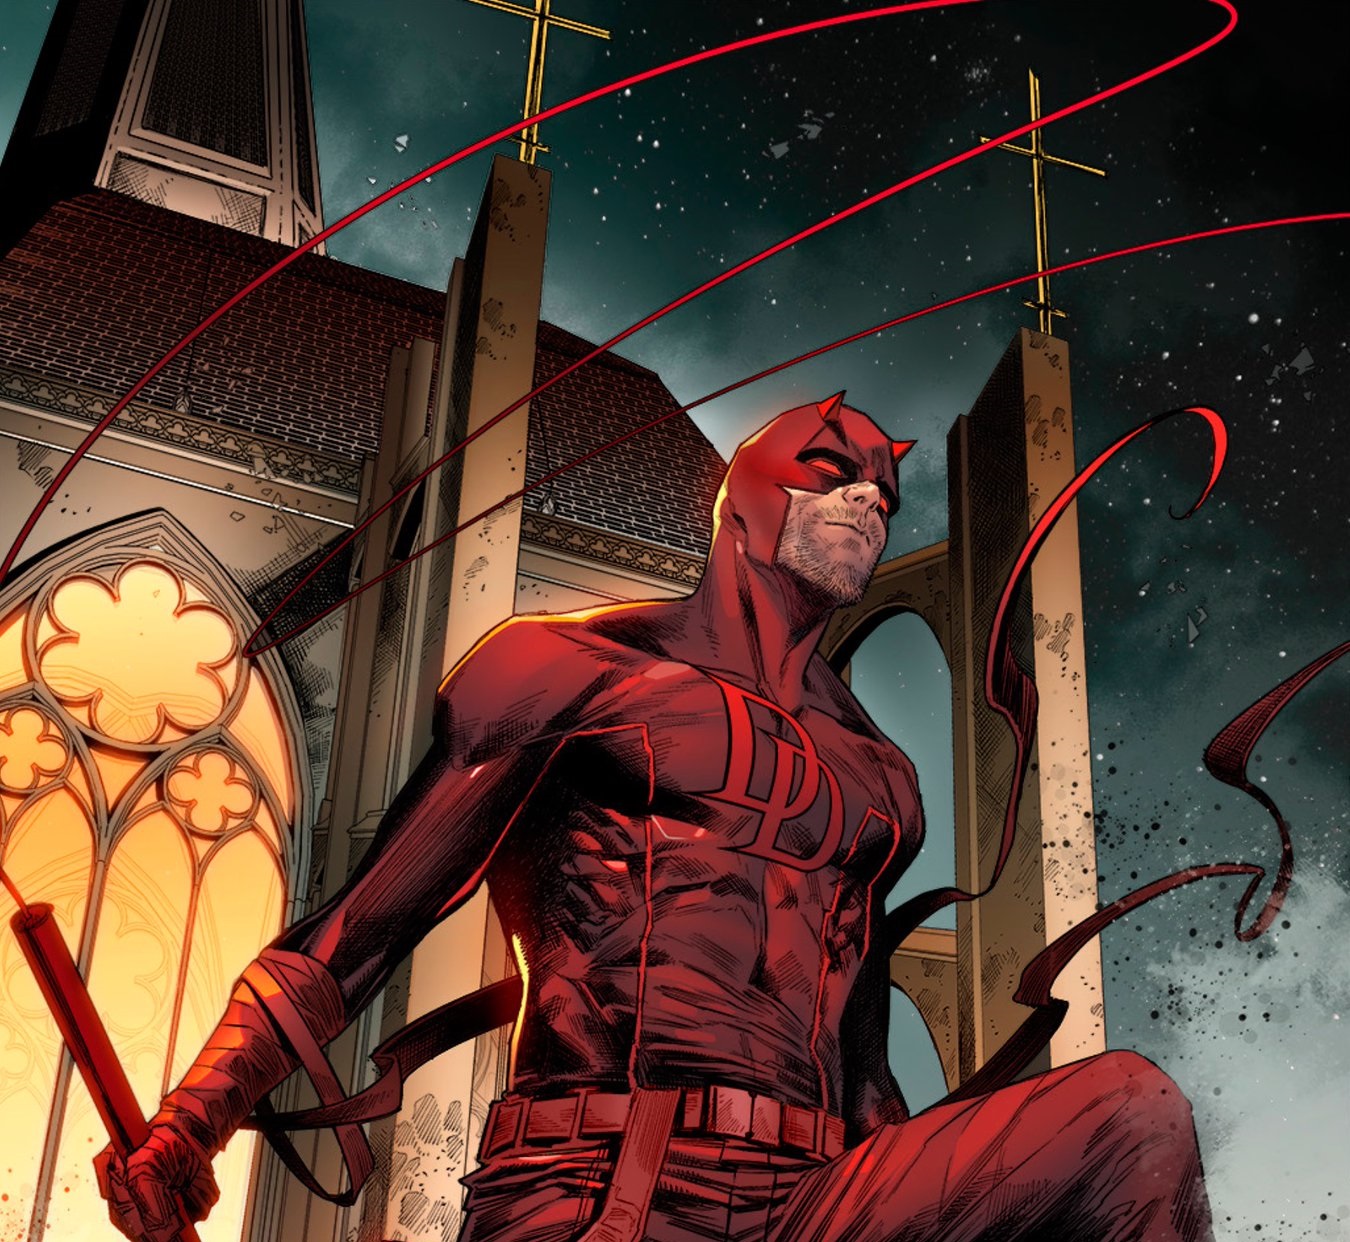 Daredevil is back in red, but what does that mean?